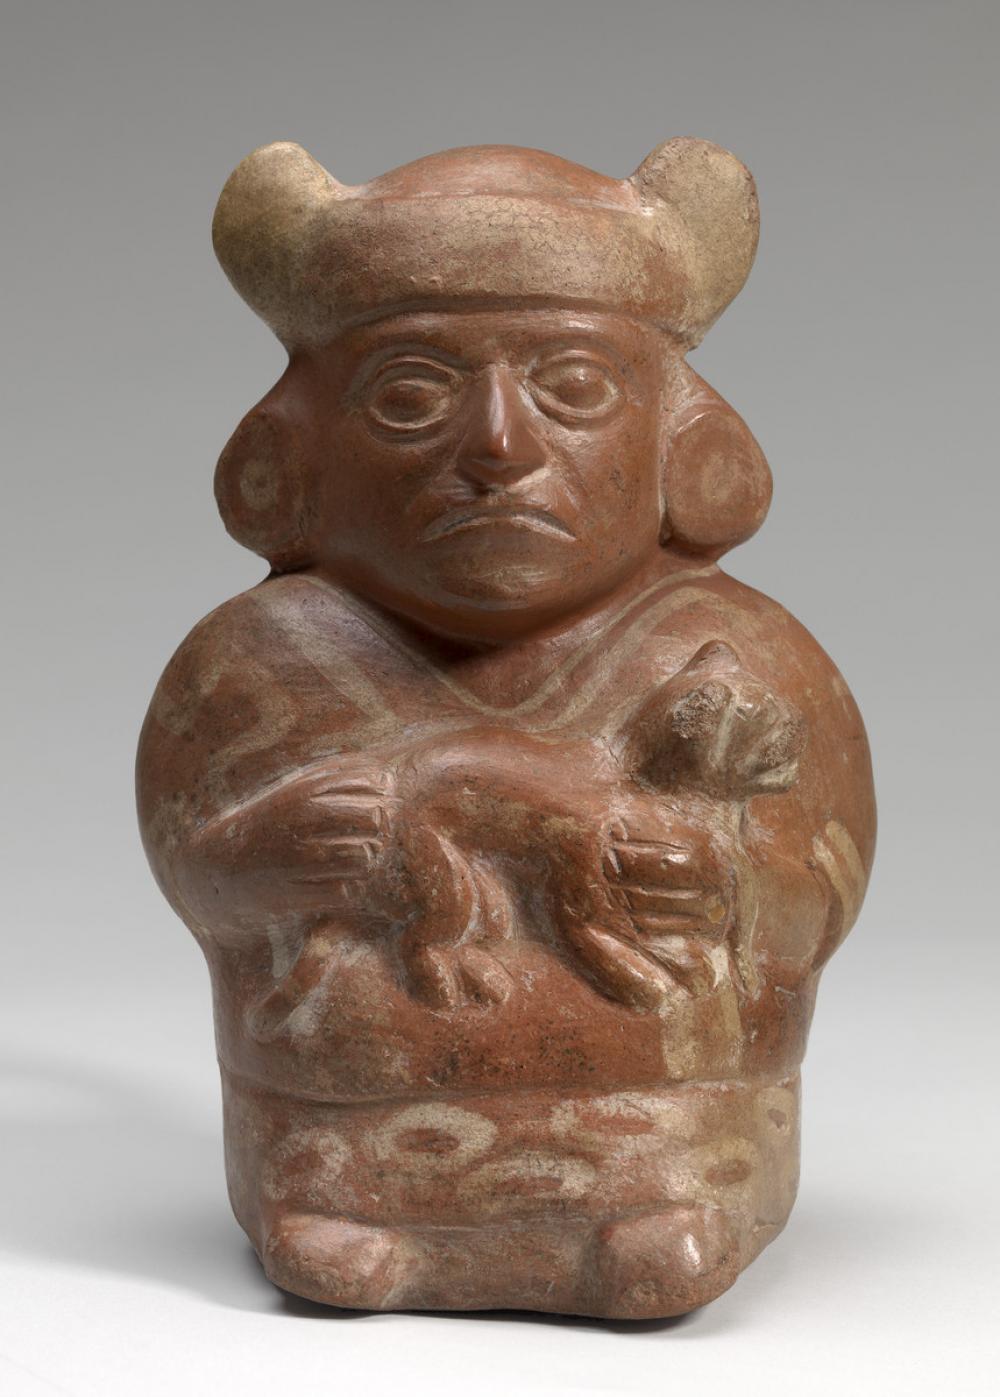 Moche, Stirrup-spouted vessel in form of a figure holding a feline